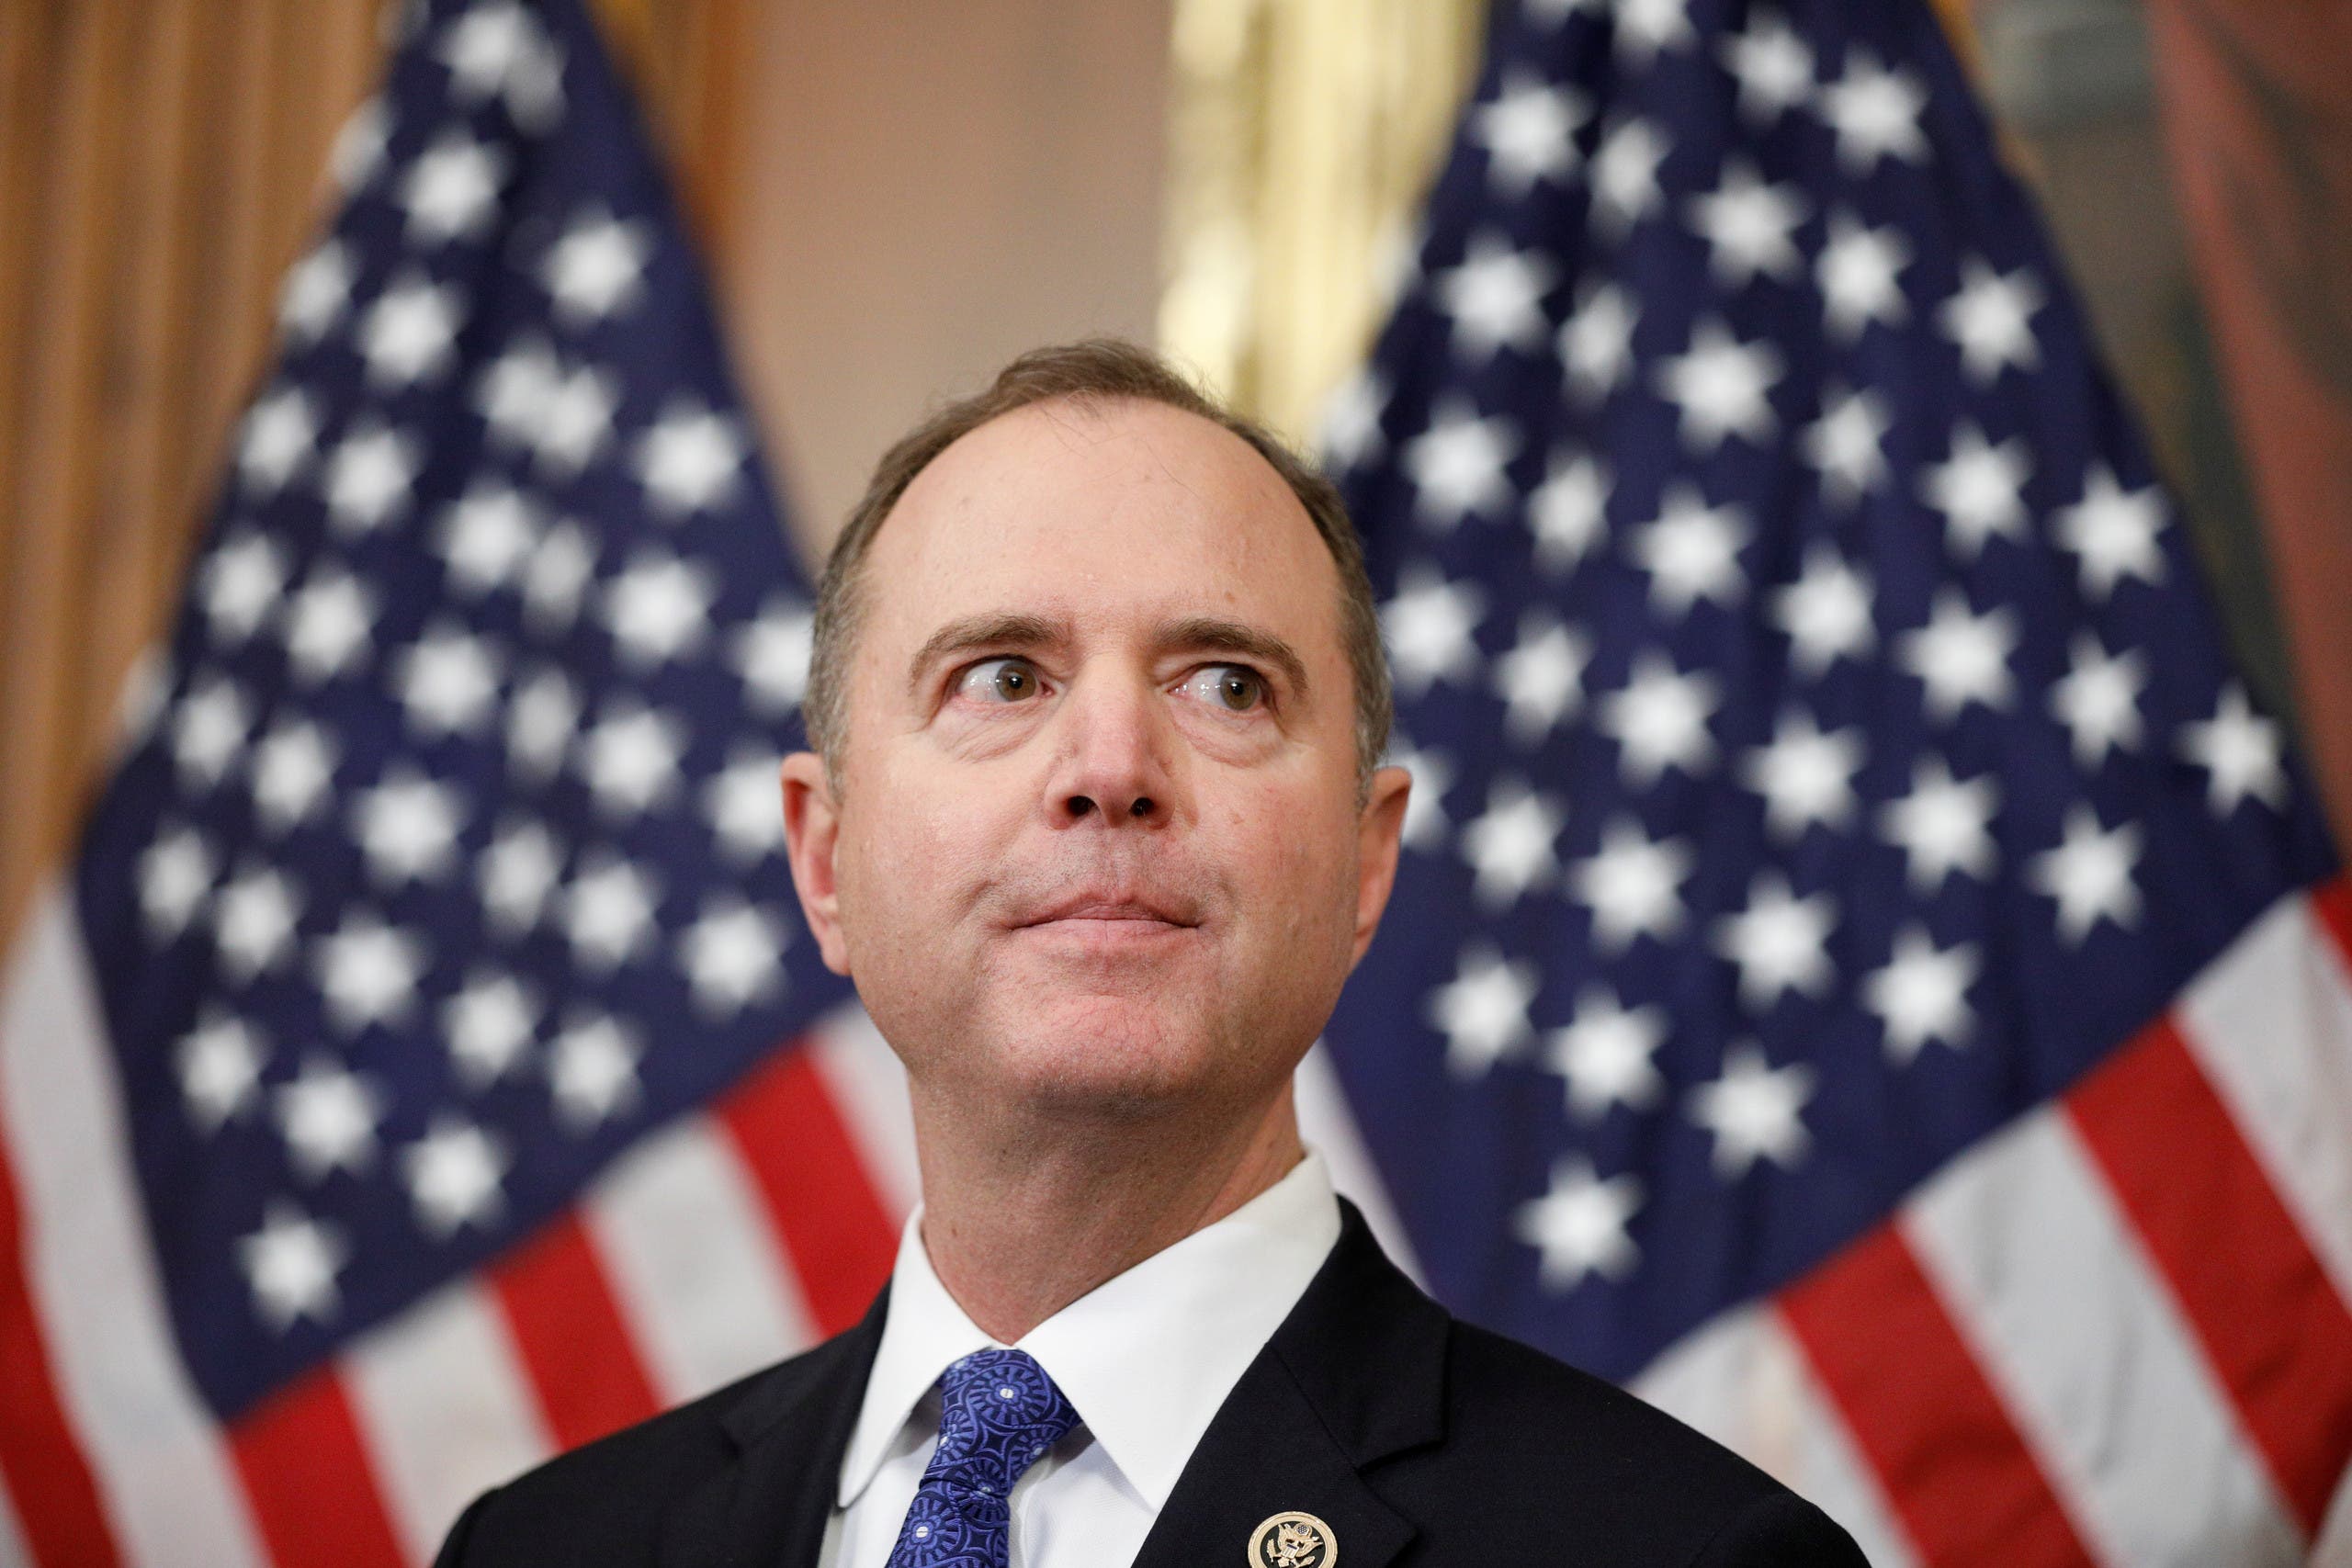 House Intelligence Committee Chairman Adam Schiff speaks to the media after voting on two articles of impeachment against US President Donald Trump on December 18, 2019. (Reuters)